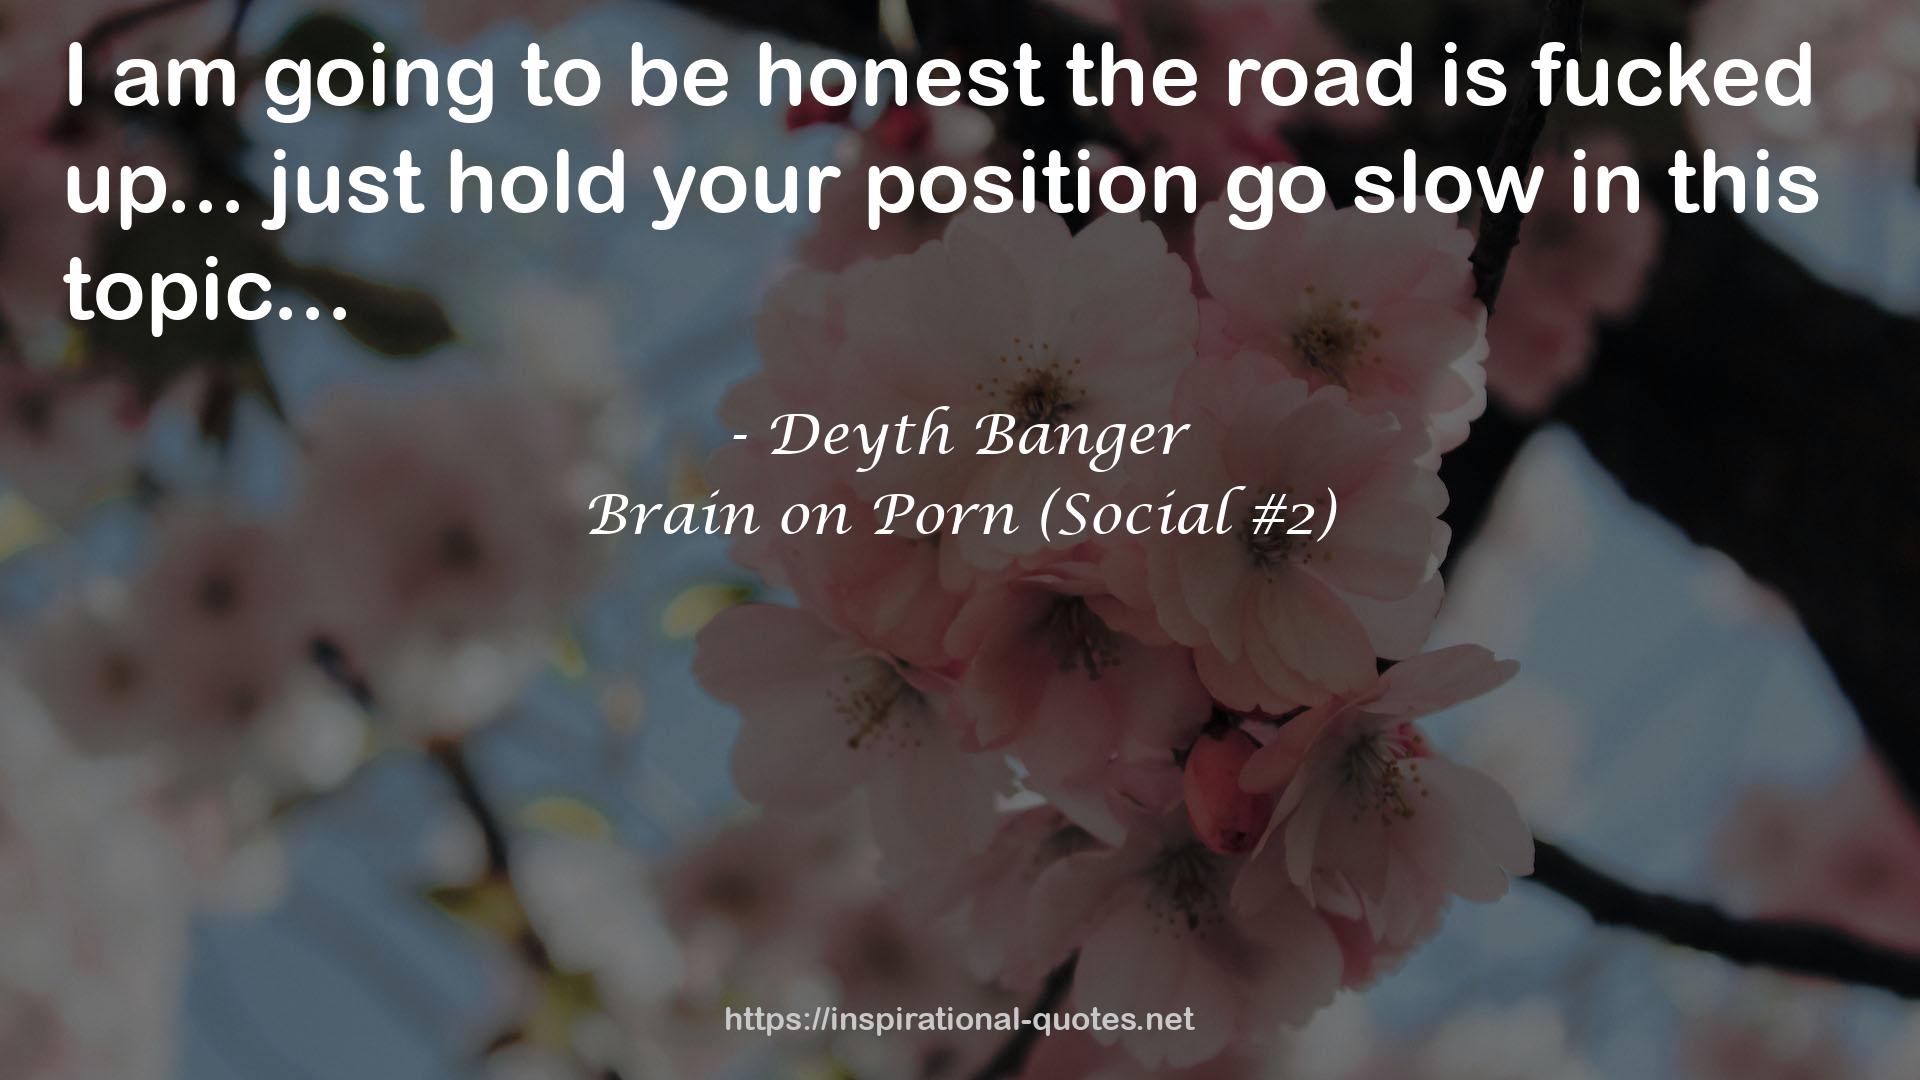 Brain on Porn (Social #2) QUOTES